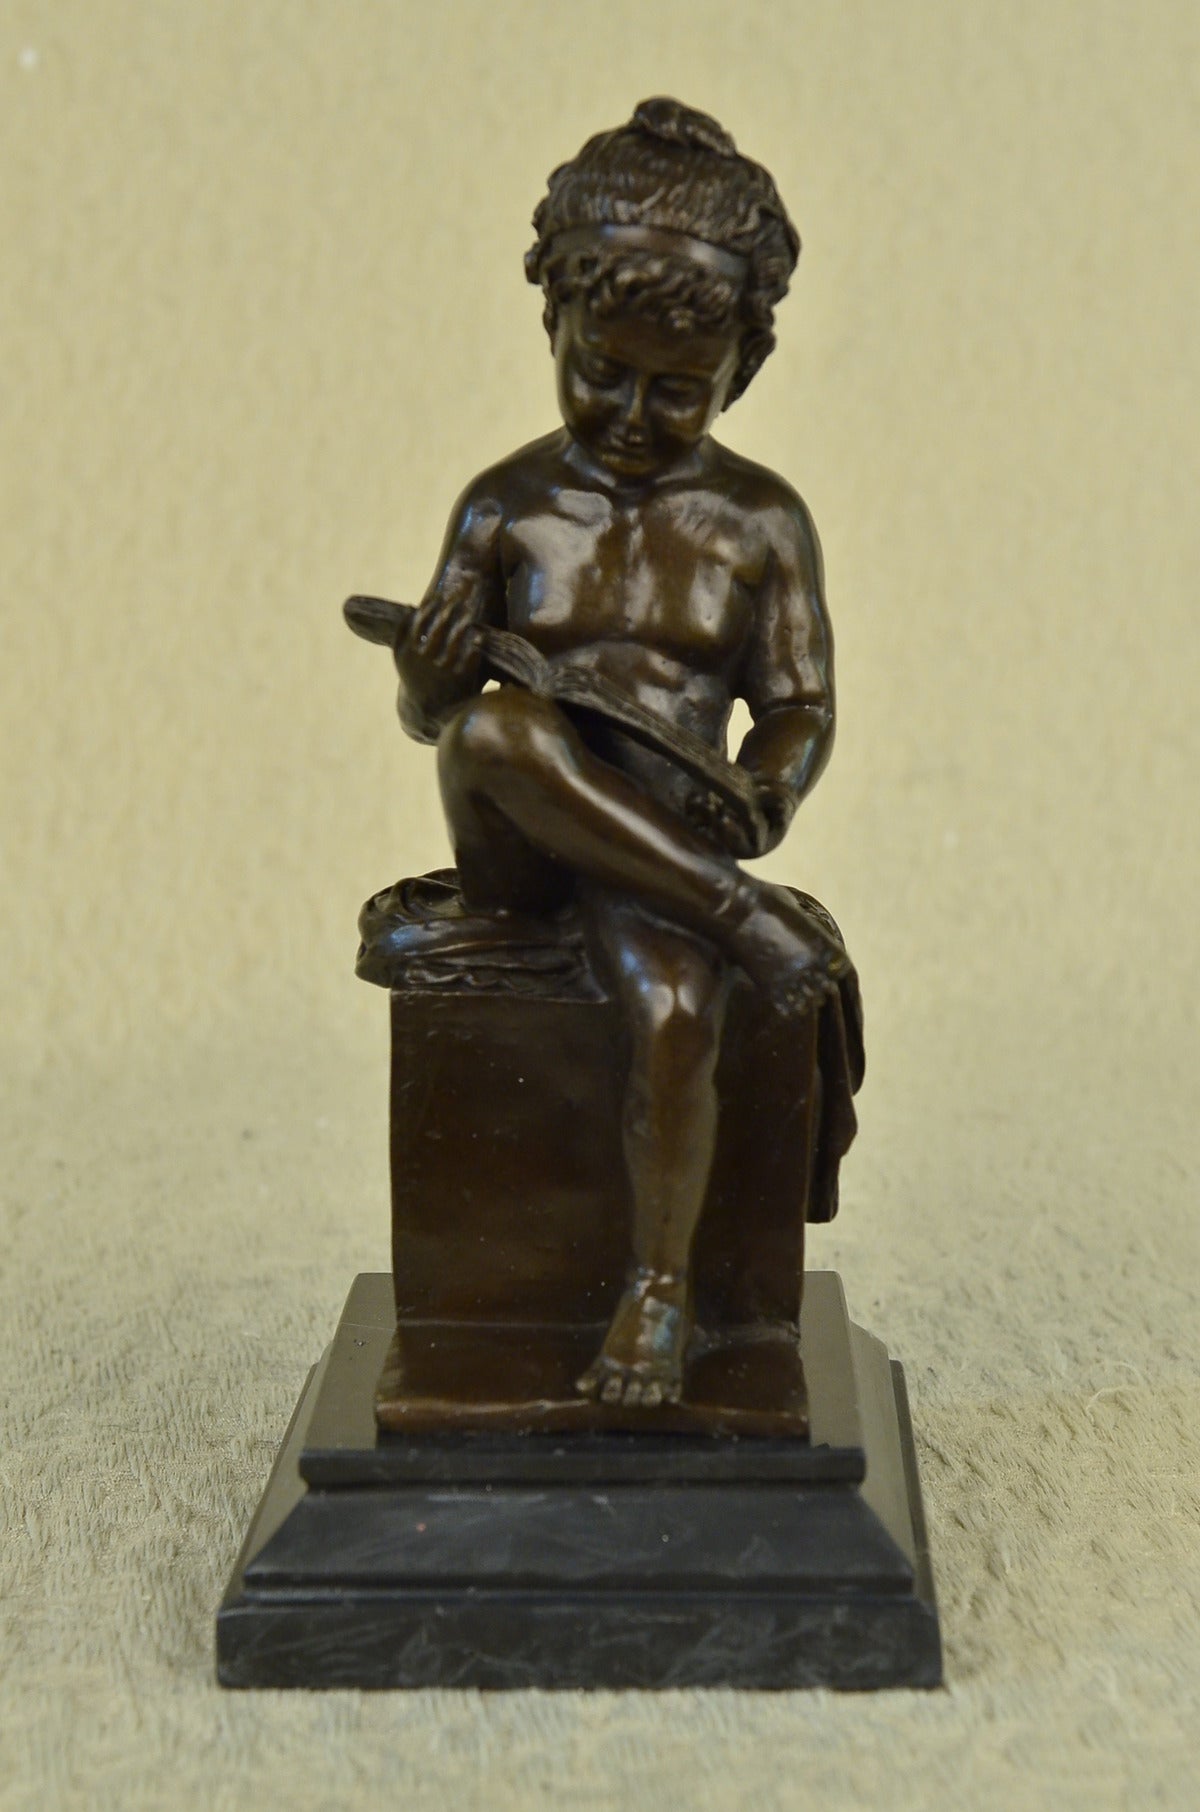 Handcrafted bronze sculpture SALE Marble Deco Art Book Reading Girl Young Nude